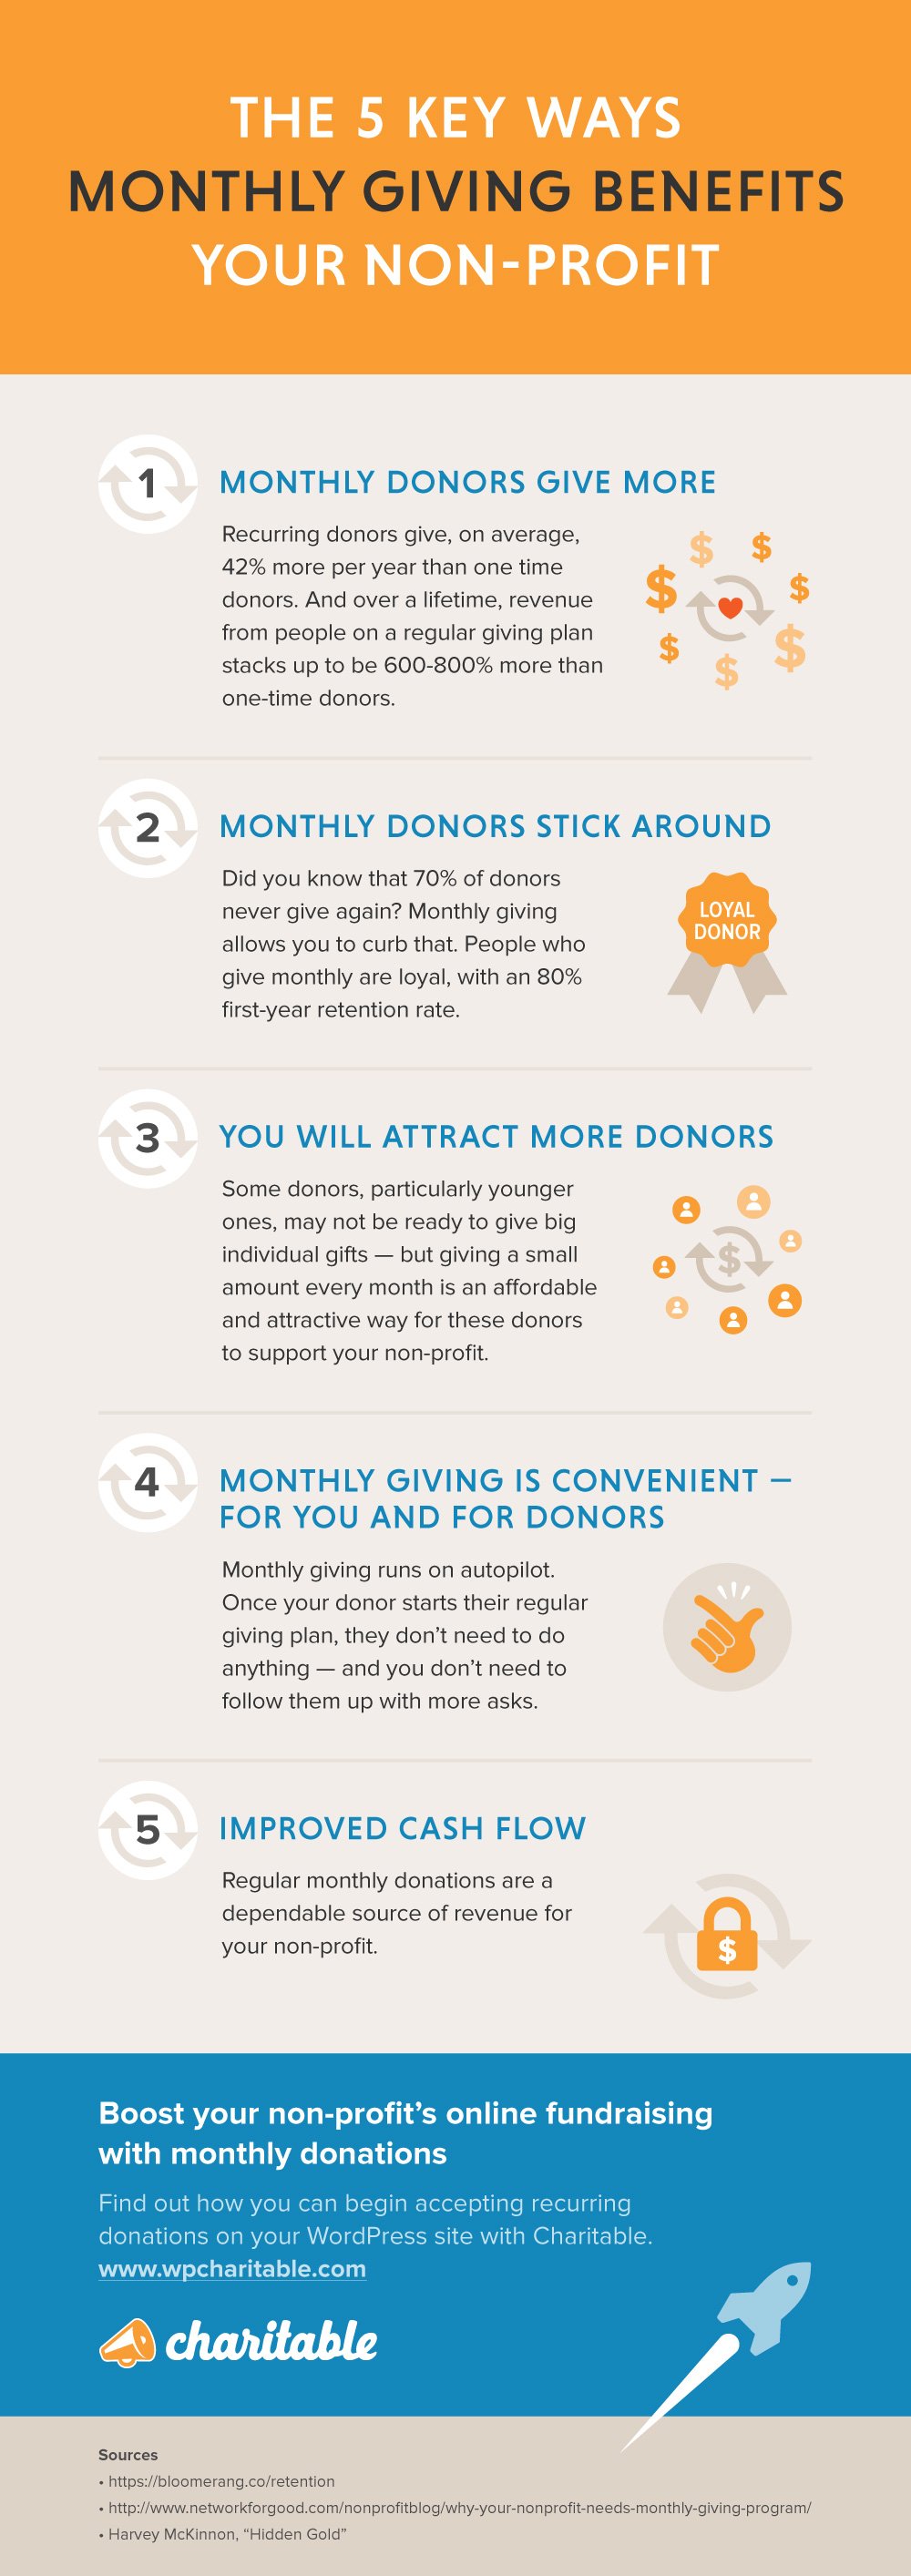 Infographic showing 5 key benefits of monthly giving: 1. Monthly donors give more. 2. Monthly donors stick around. 3. You will attract more donors. 4. Monthly giving is convenient, for you and your donors. 5. Improved cash flow